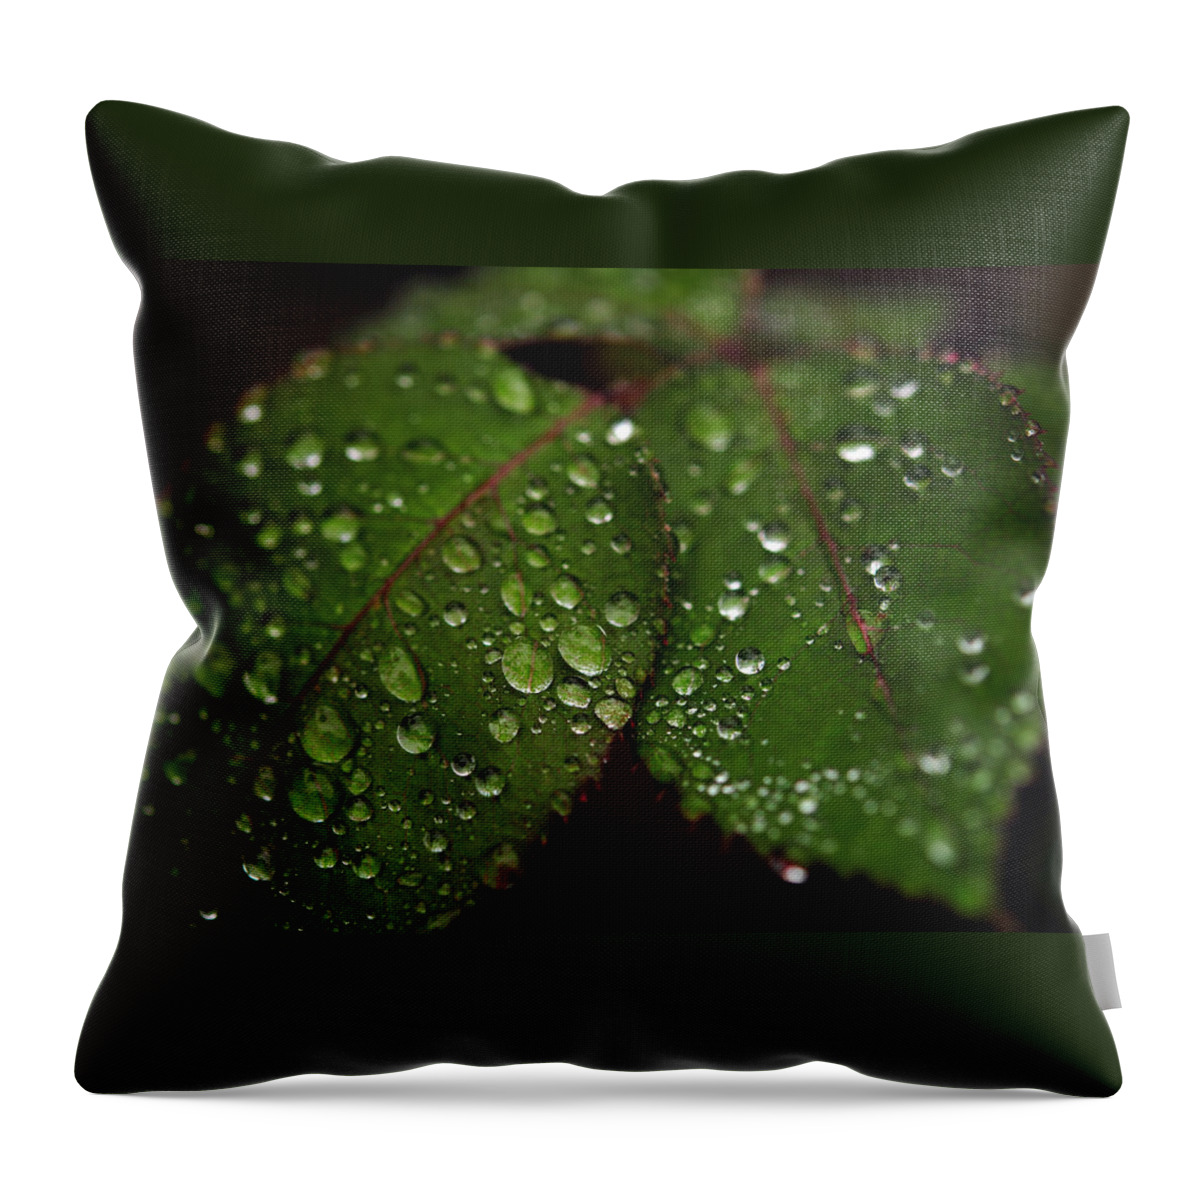  Leaves Throw Pillow featuring the photograph Green Leaves by Dragan Kudjerski